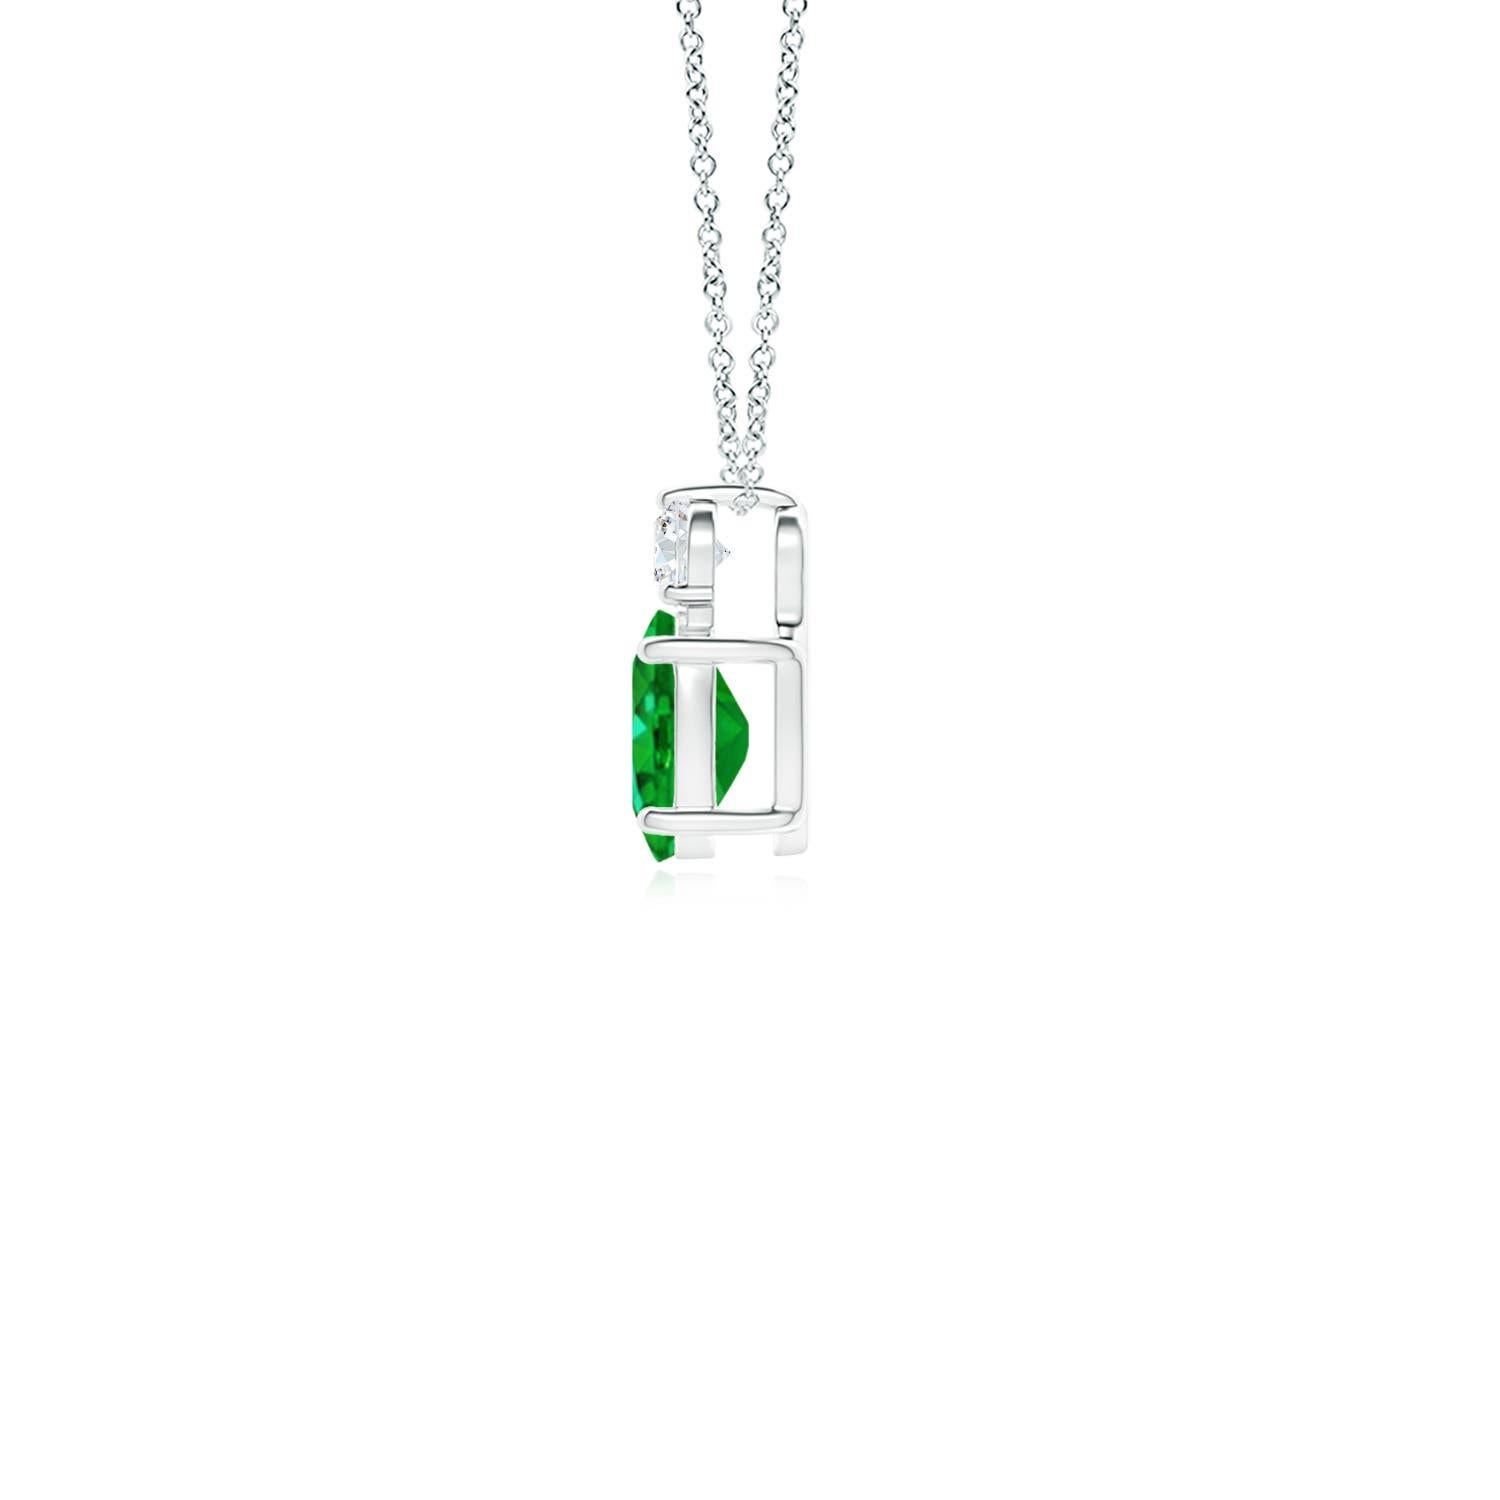 Crafted in 14k white gold, this classic solitaire emerald pendant personifies elegance. The rich green oval emerald is topped by a sparkling diamond for added allure. The intricate scroll work on the sides enhances this prong set emerald pendant's